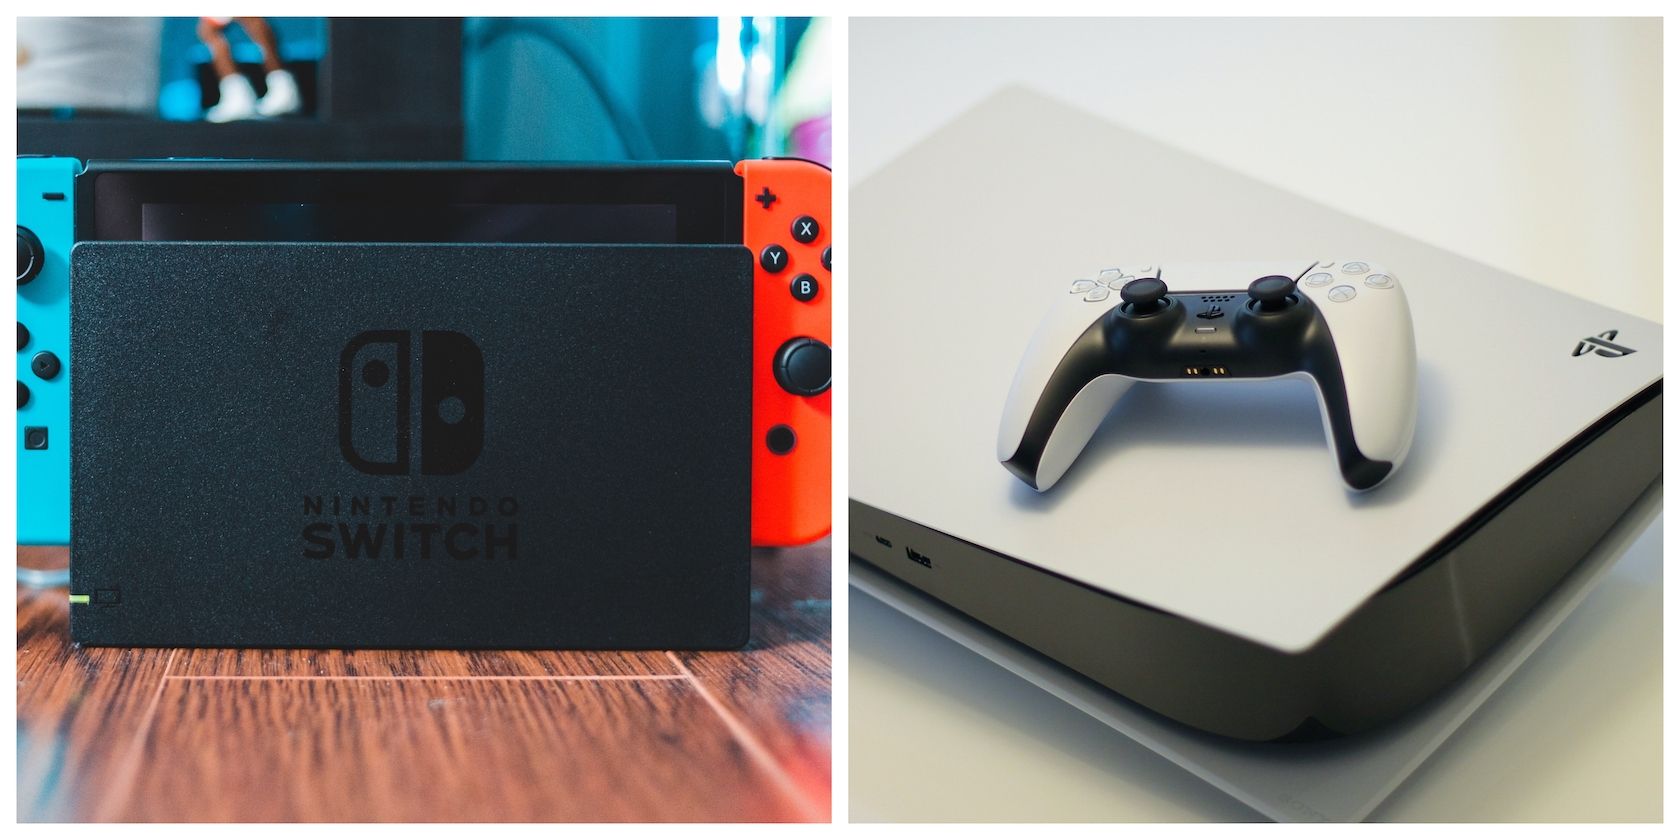 The Nintendo Switch and PS5 side by side